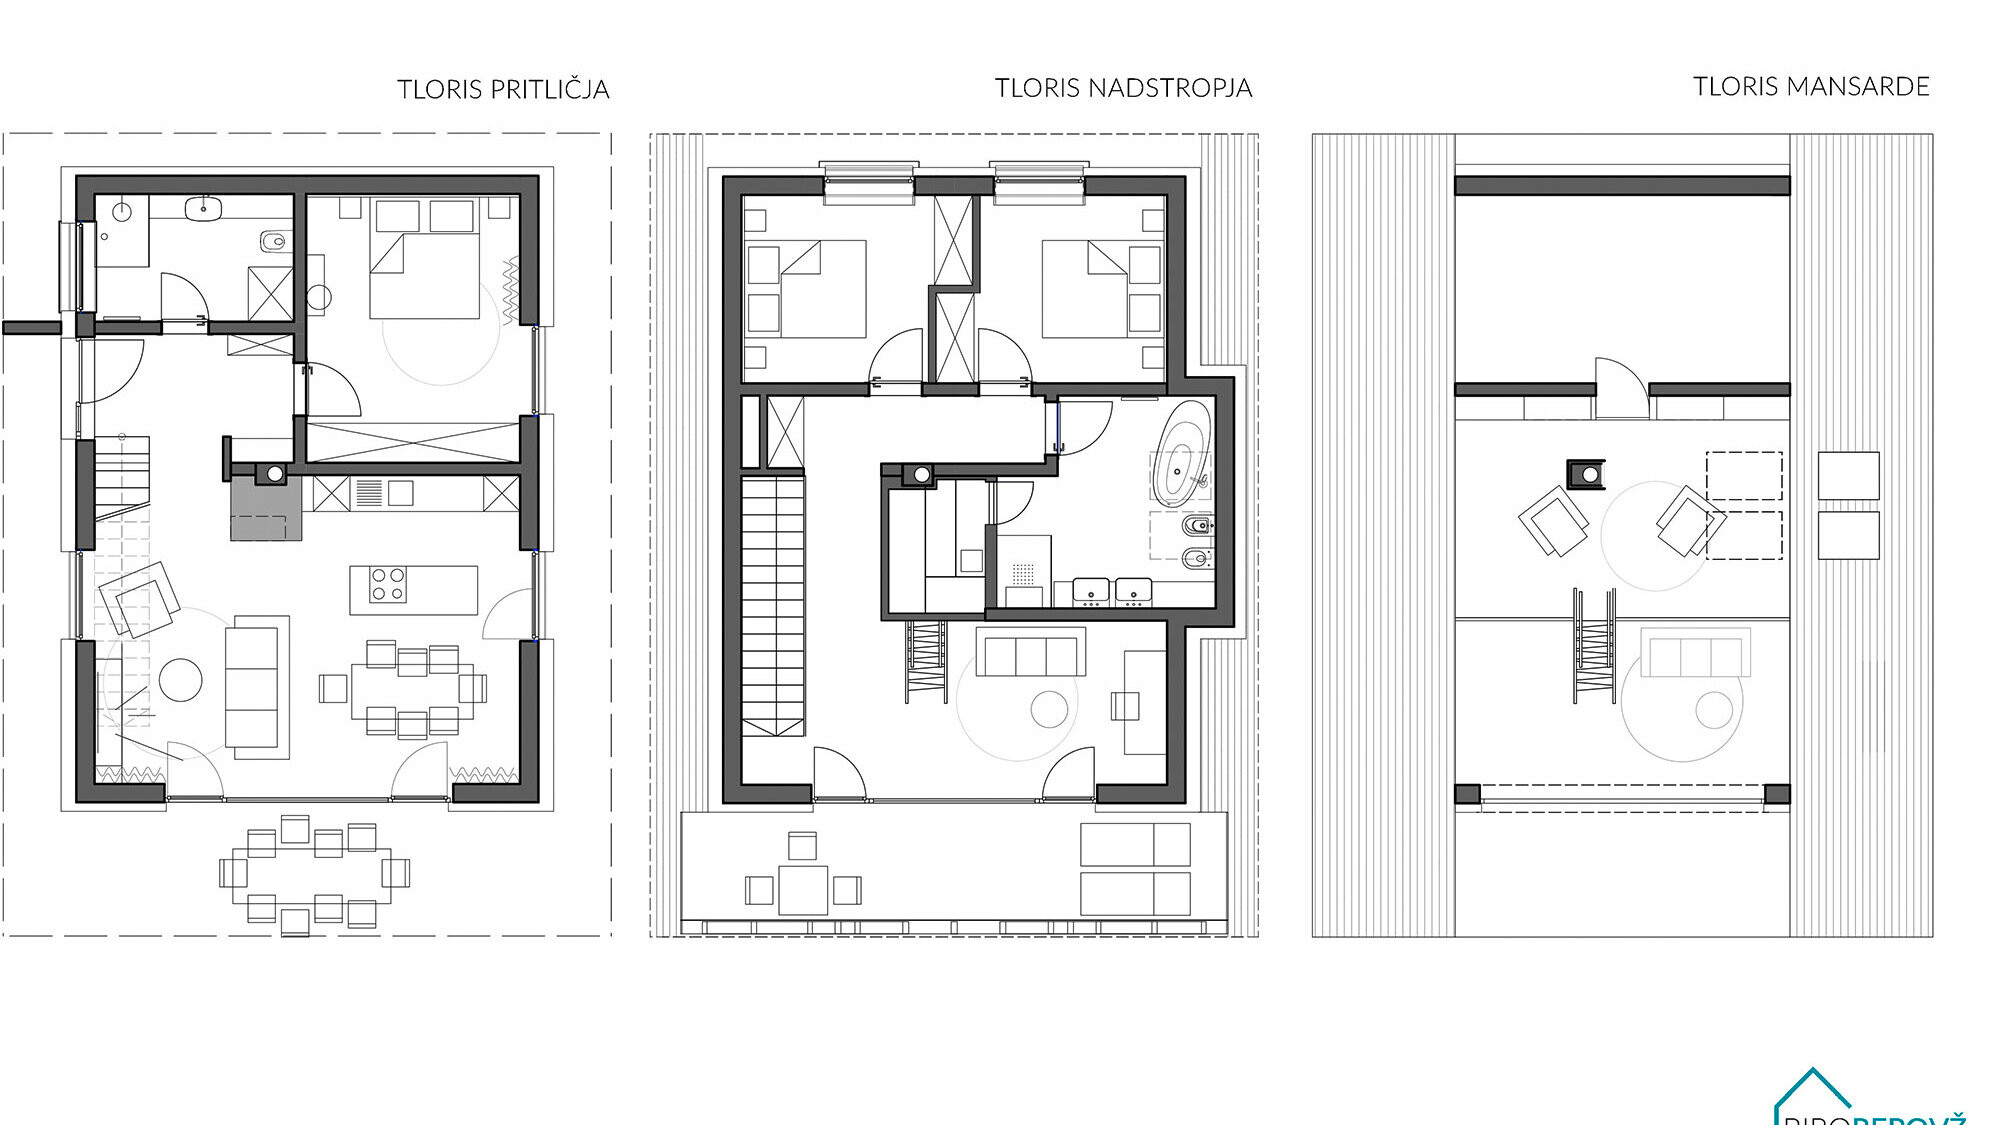 The picture shows the floor plans of the Alpine chalet on three different levels. From left to right, the following levels can be seen: "TLORIS PRITLIČJA" - which means "ground floor plan". "TLORIS NADSTROPJA" - which can be translated as "floor plan of the upper floor". "TLORIS MANSARDE" - this refers to the "floor plan of the attic" or mansard. The drawings show the layout of the rooms, doors, windows and furnishings as well as the entrances and staircases connecting the different floors.  Translated with DeepL.com (free version)